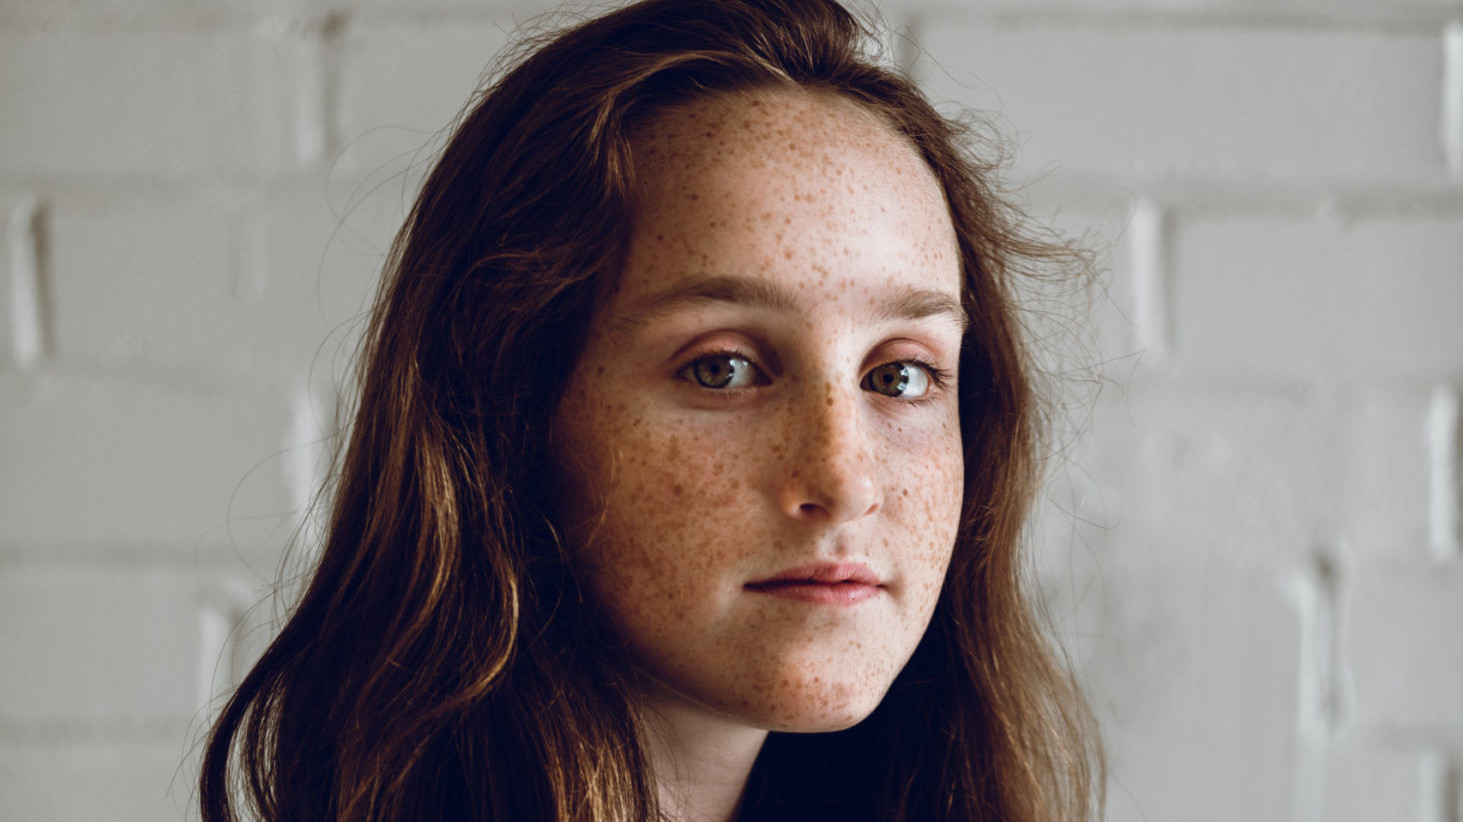 Young freckled girl half smiles while facing the camera